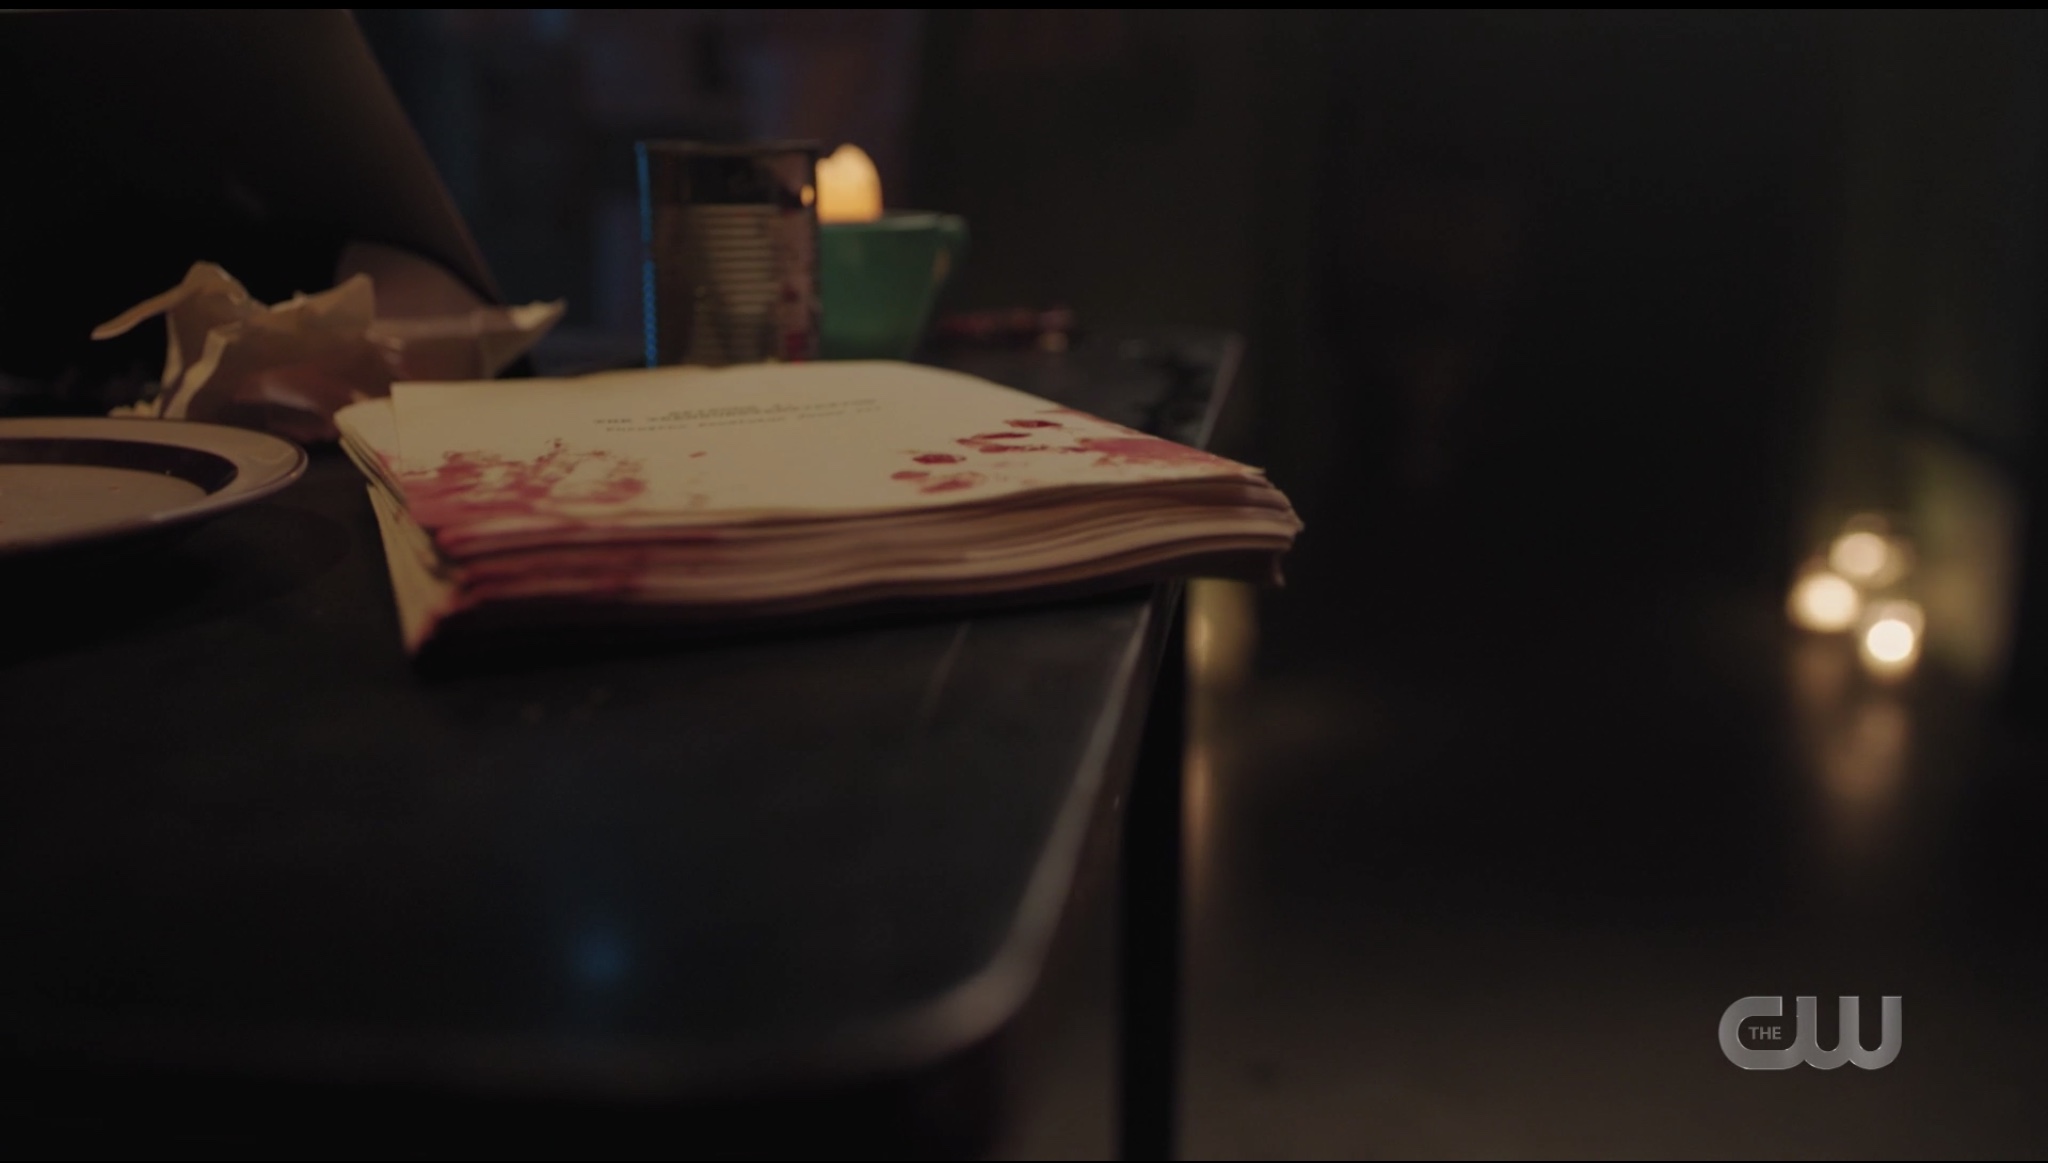 There's his paper, but where in Riverdale is Jughead?